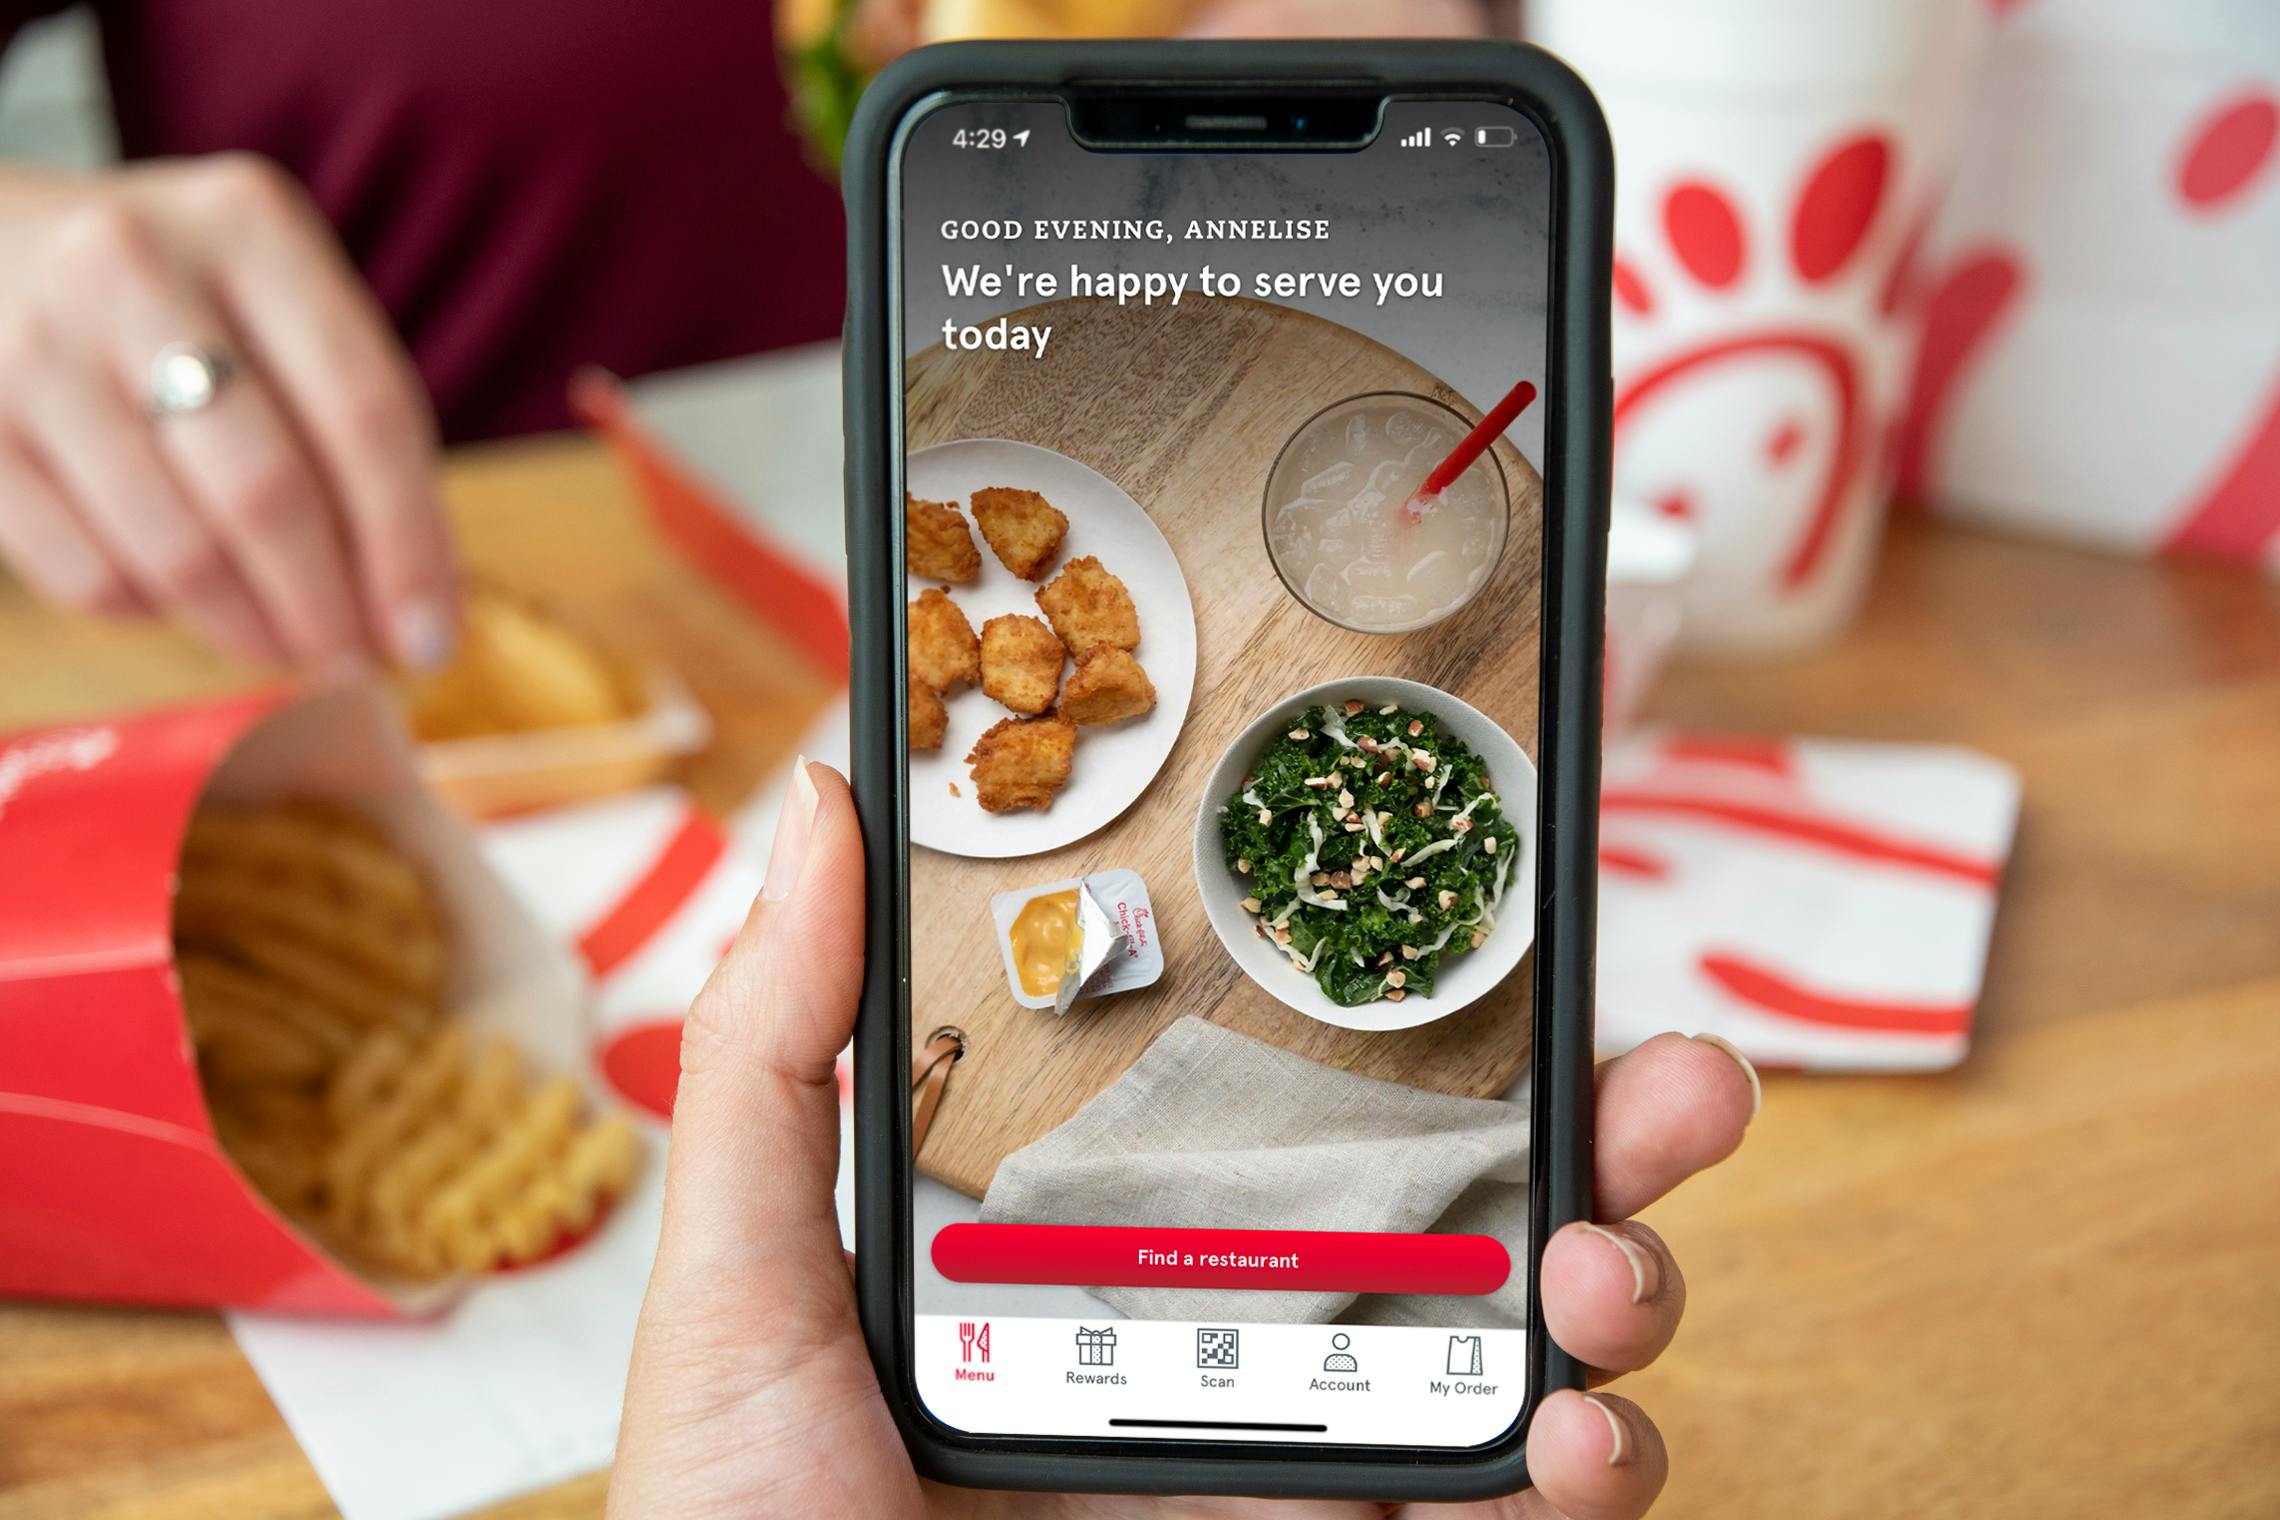 The Chick-fil-a app on a cell phone with a person eating chick-fil-a in the background.